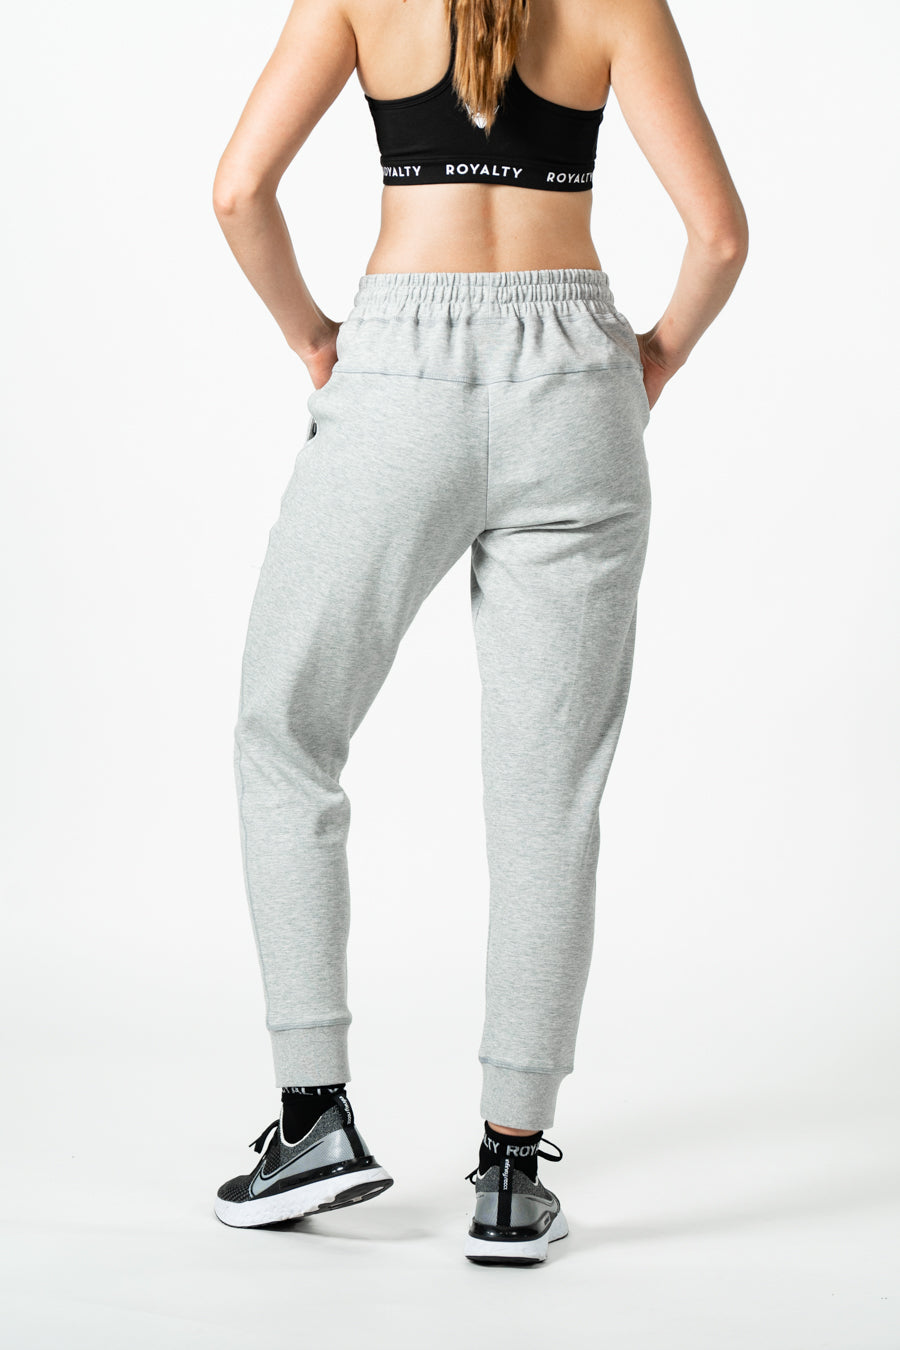 Grey Mid Rise Jogger Pants Online Shopping